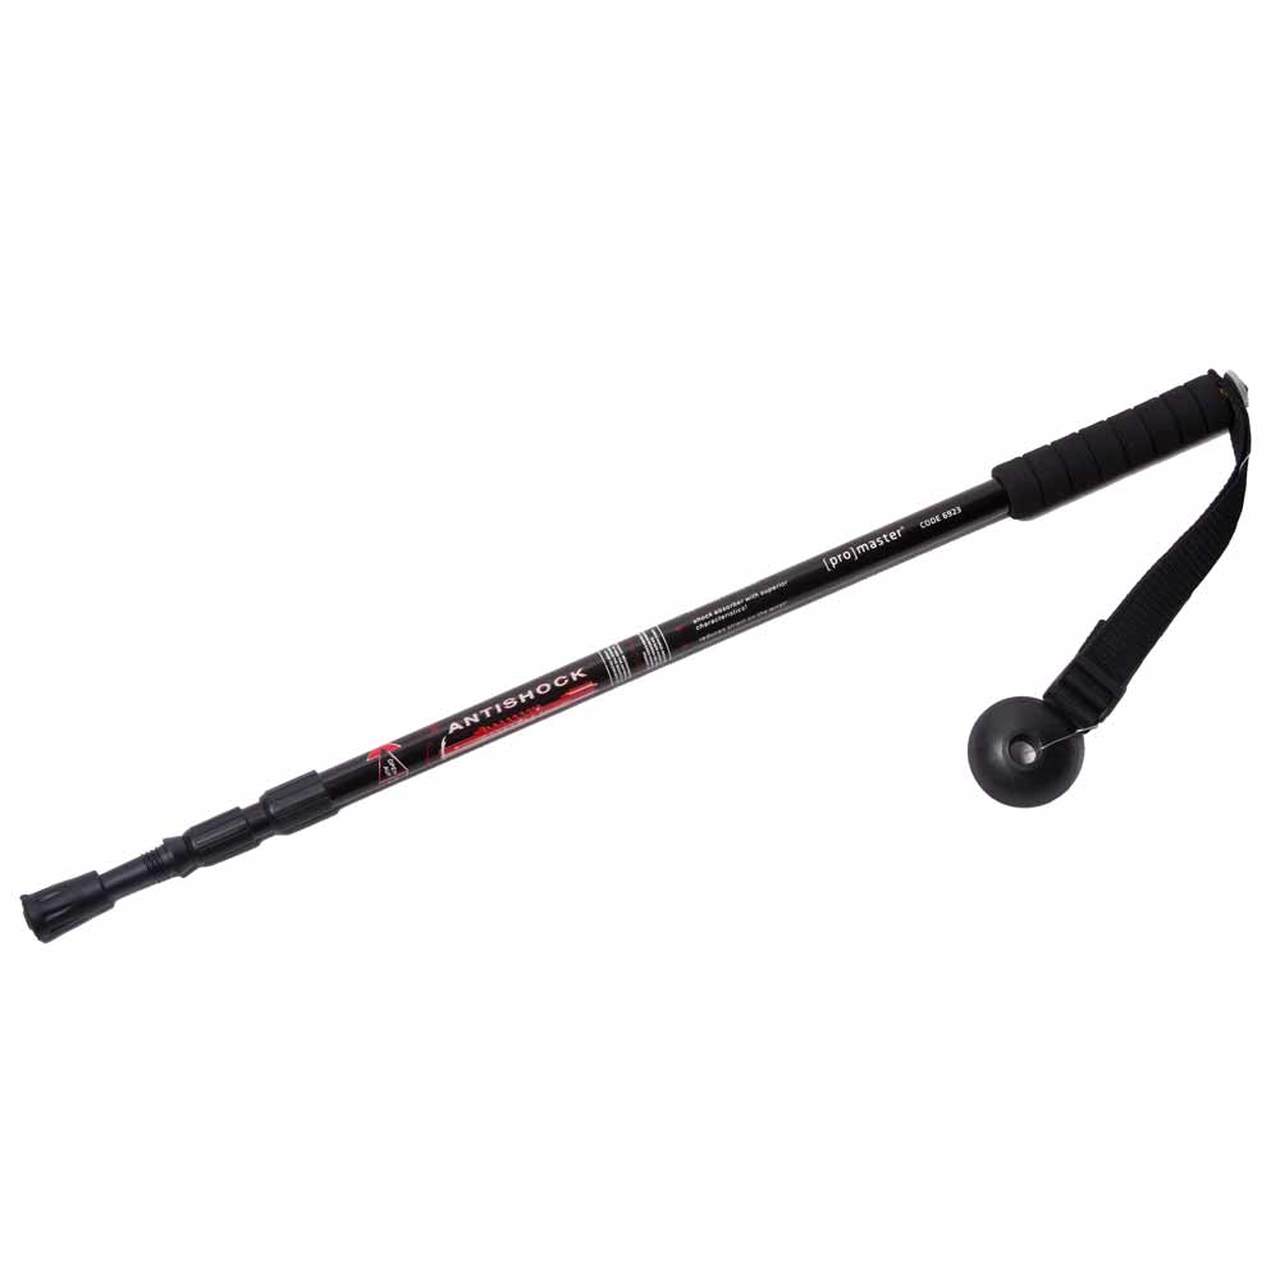 Promaster 6923 Monopod / Walking Stick  With Compass